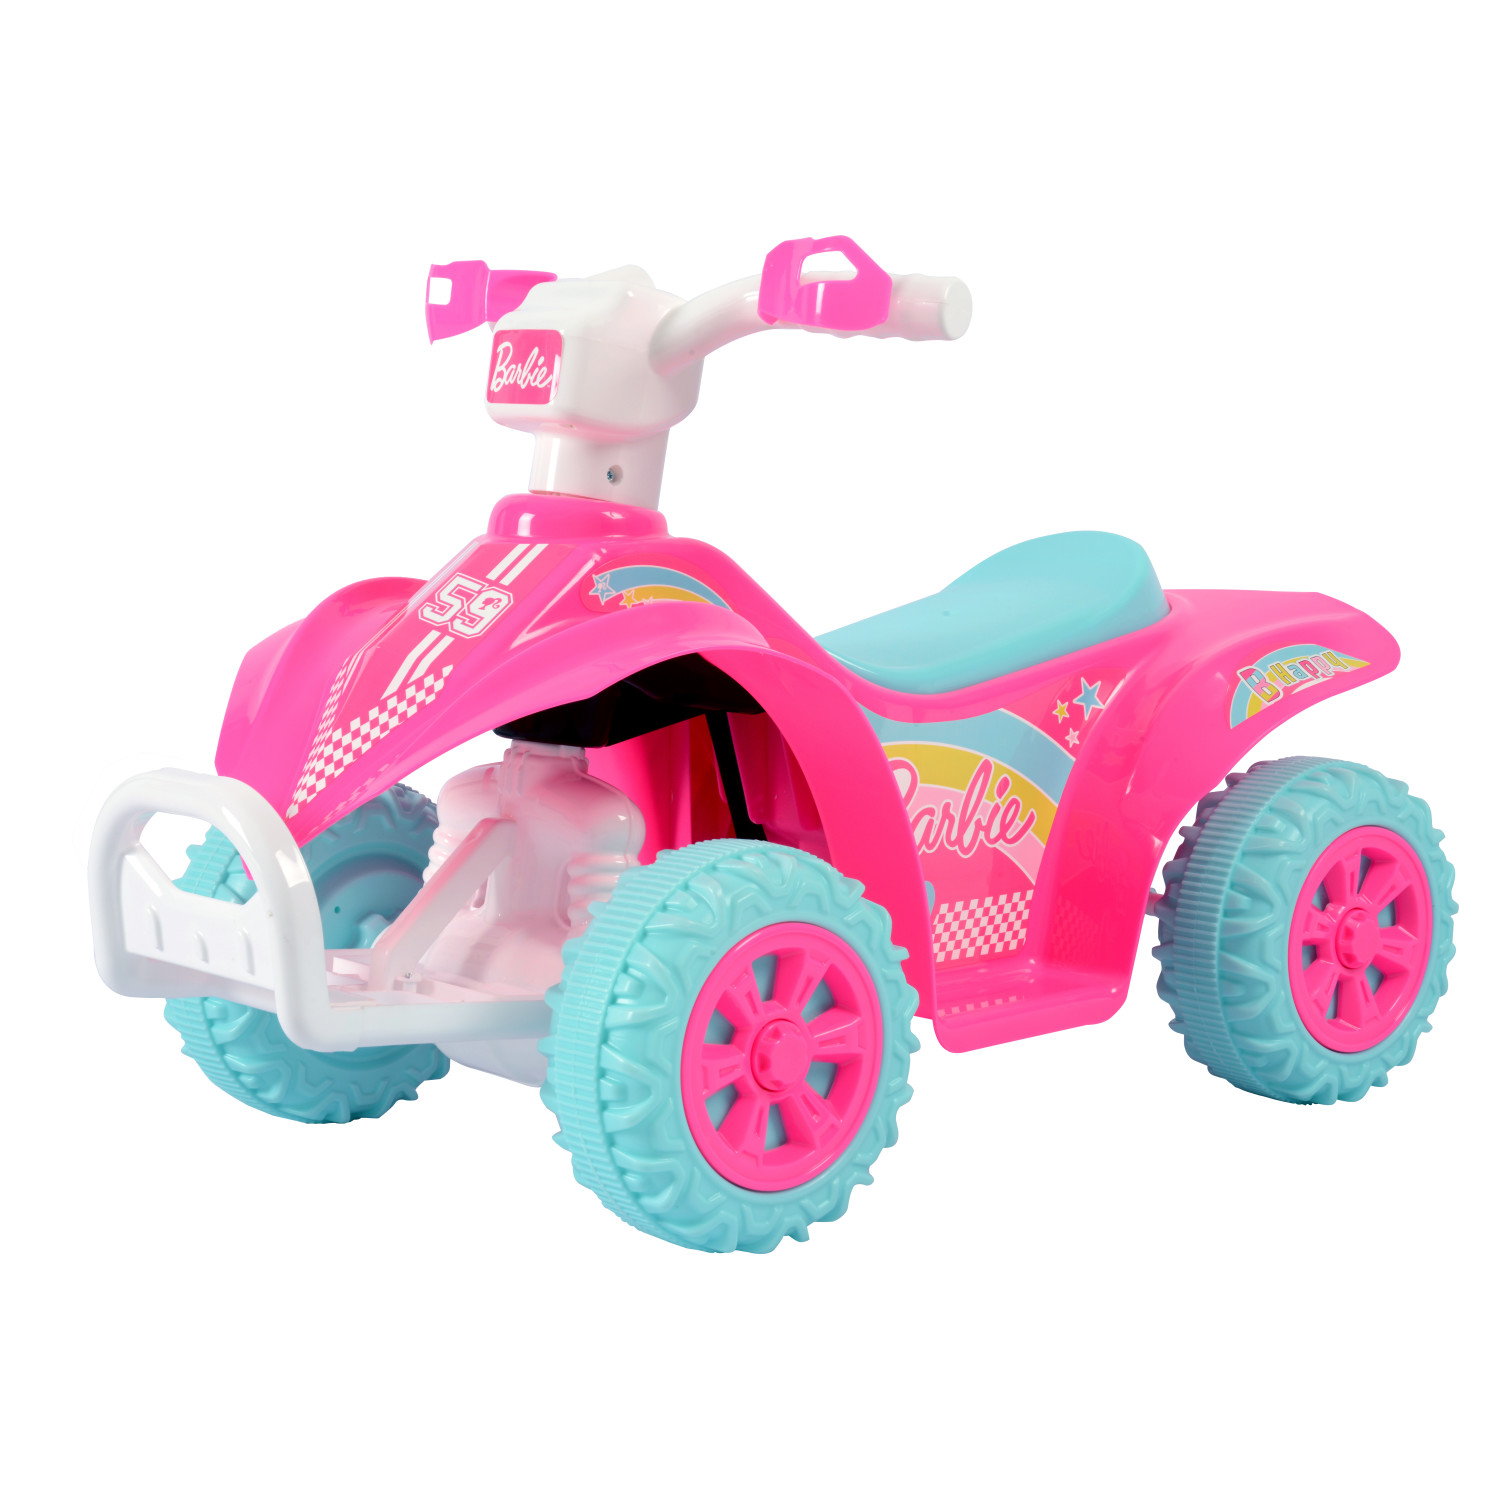 Licensed Barbie 6V Battery Powered Ride on ATV for Kids Ages 2-5 Years Old, Pink - image 1 of 13